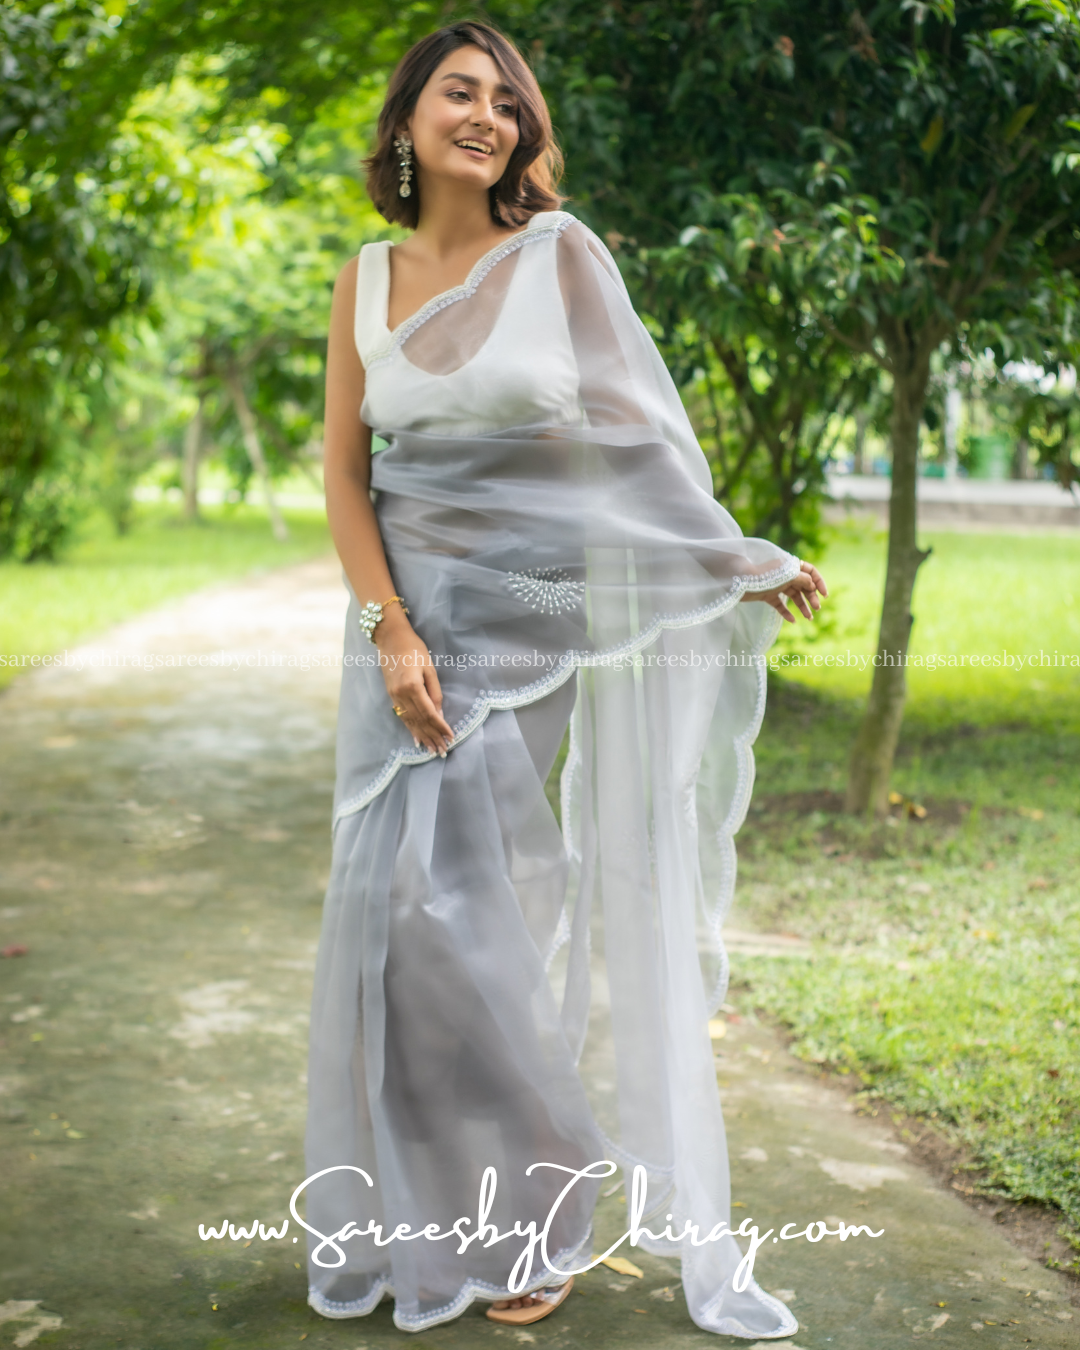 Grey Organza Saree with Exquisite Hand-Cutwork Border and Pearl Embellishments - Anika